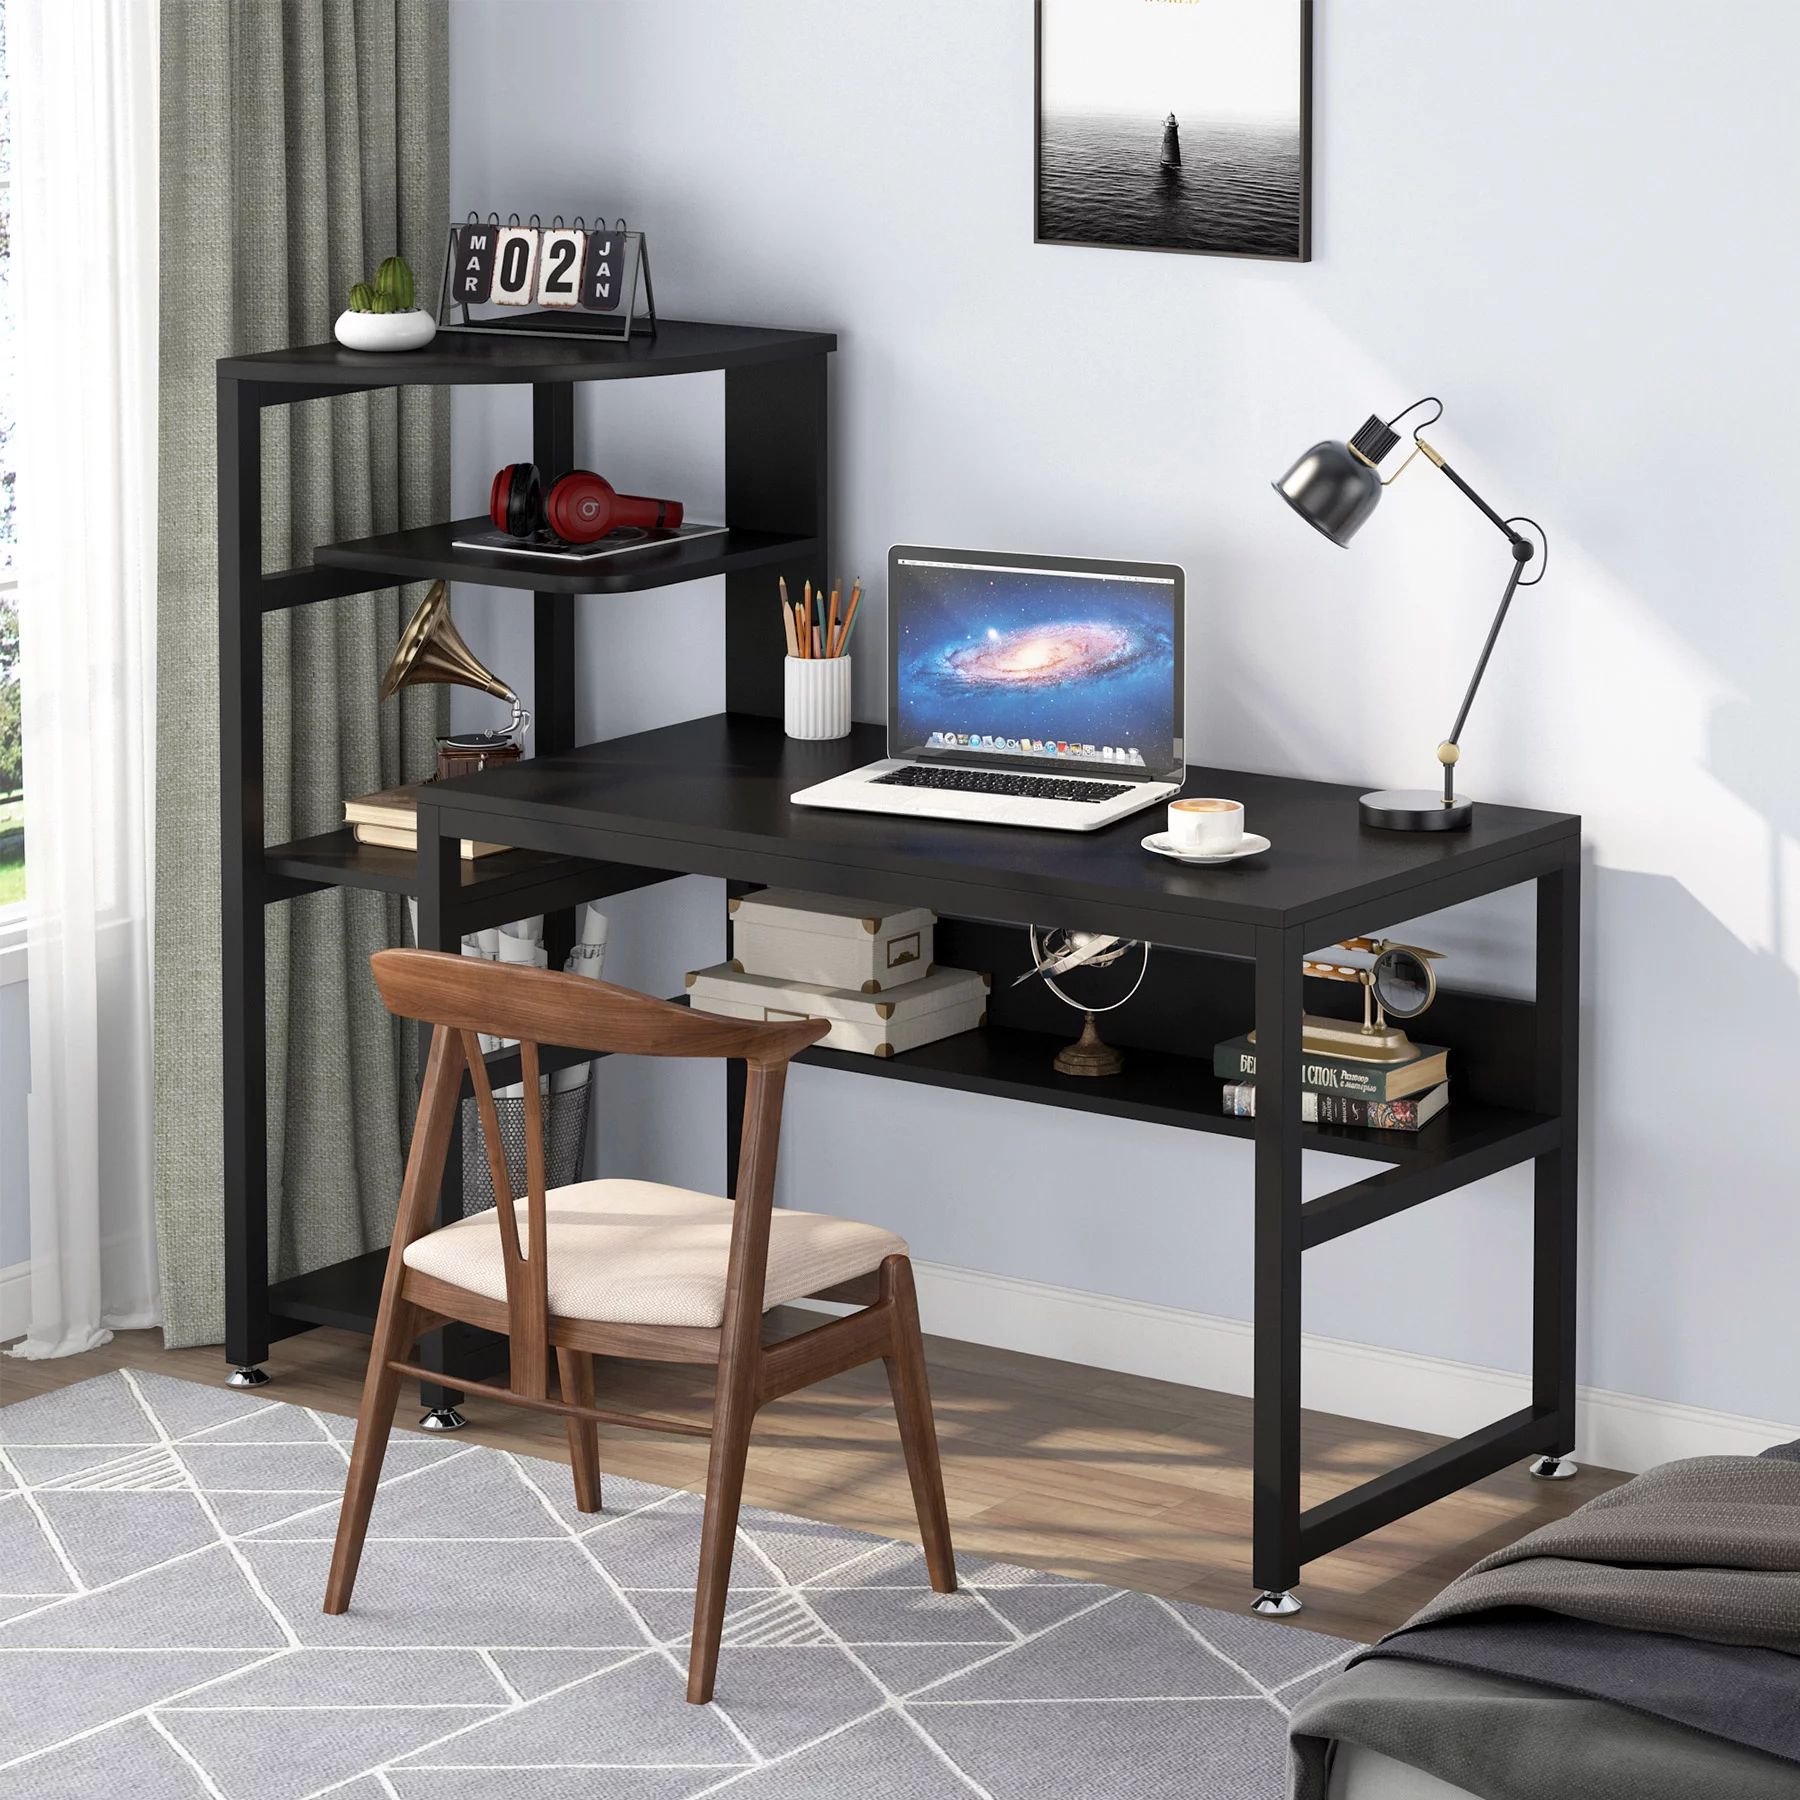 Tribesigns Computer Desk With 4 Tiers Shelves And Hutch, Modern 58 Inch In Black Finish Modern Computer Desks (View 3 of 15)